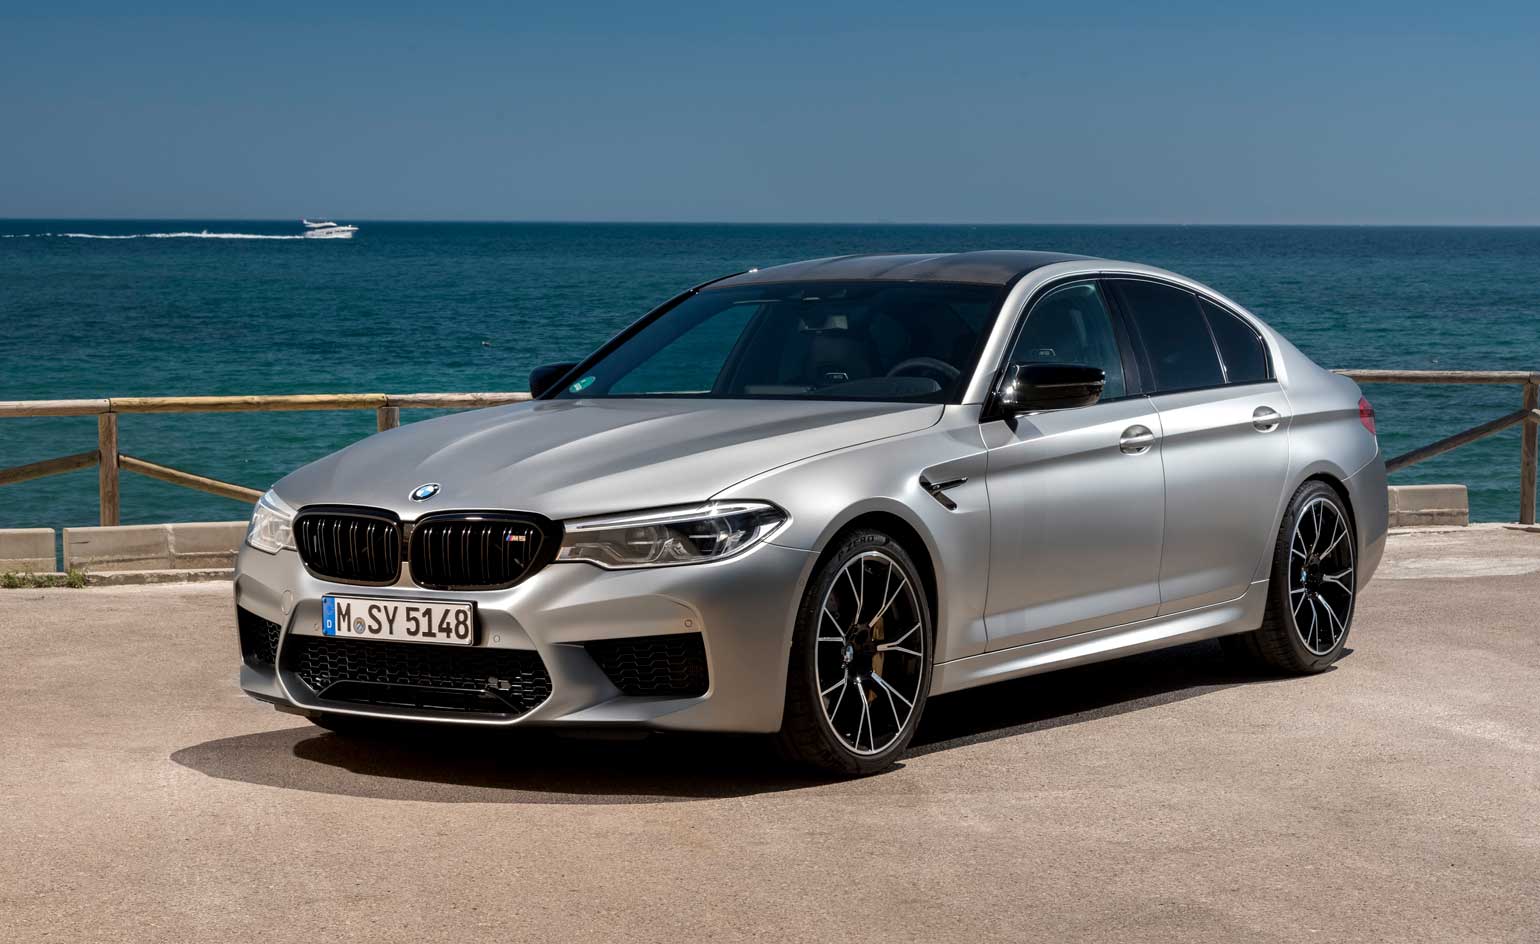 BMW M5 Competition 2018 review. Wallpaper*